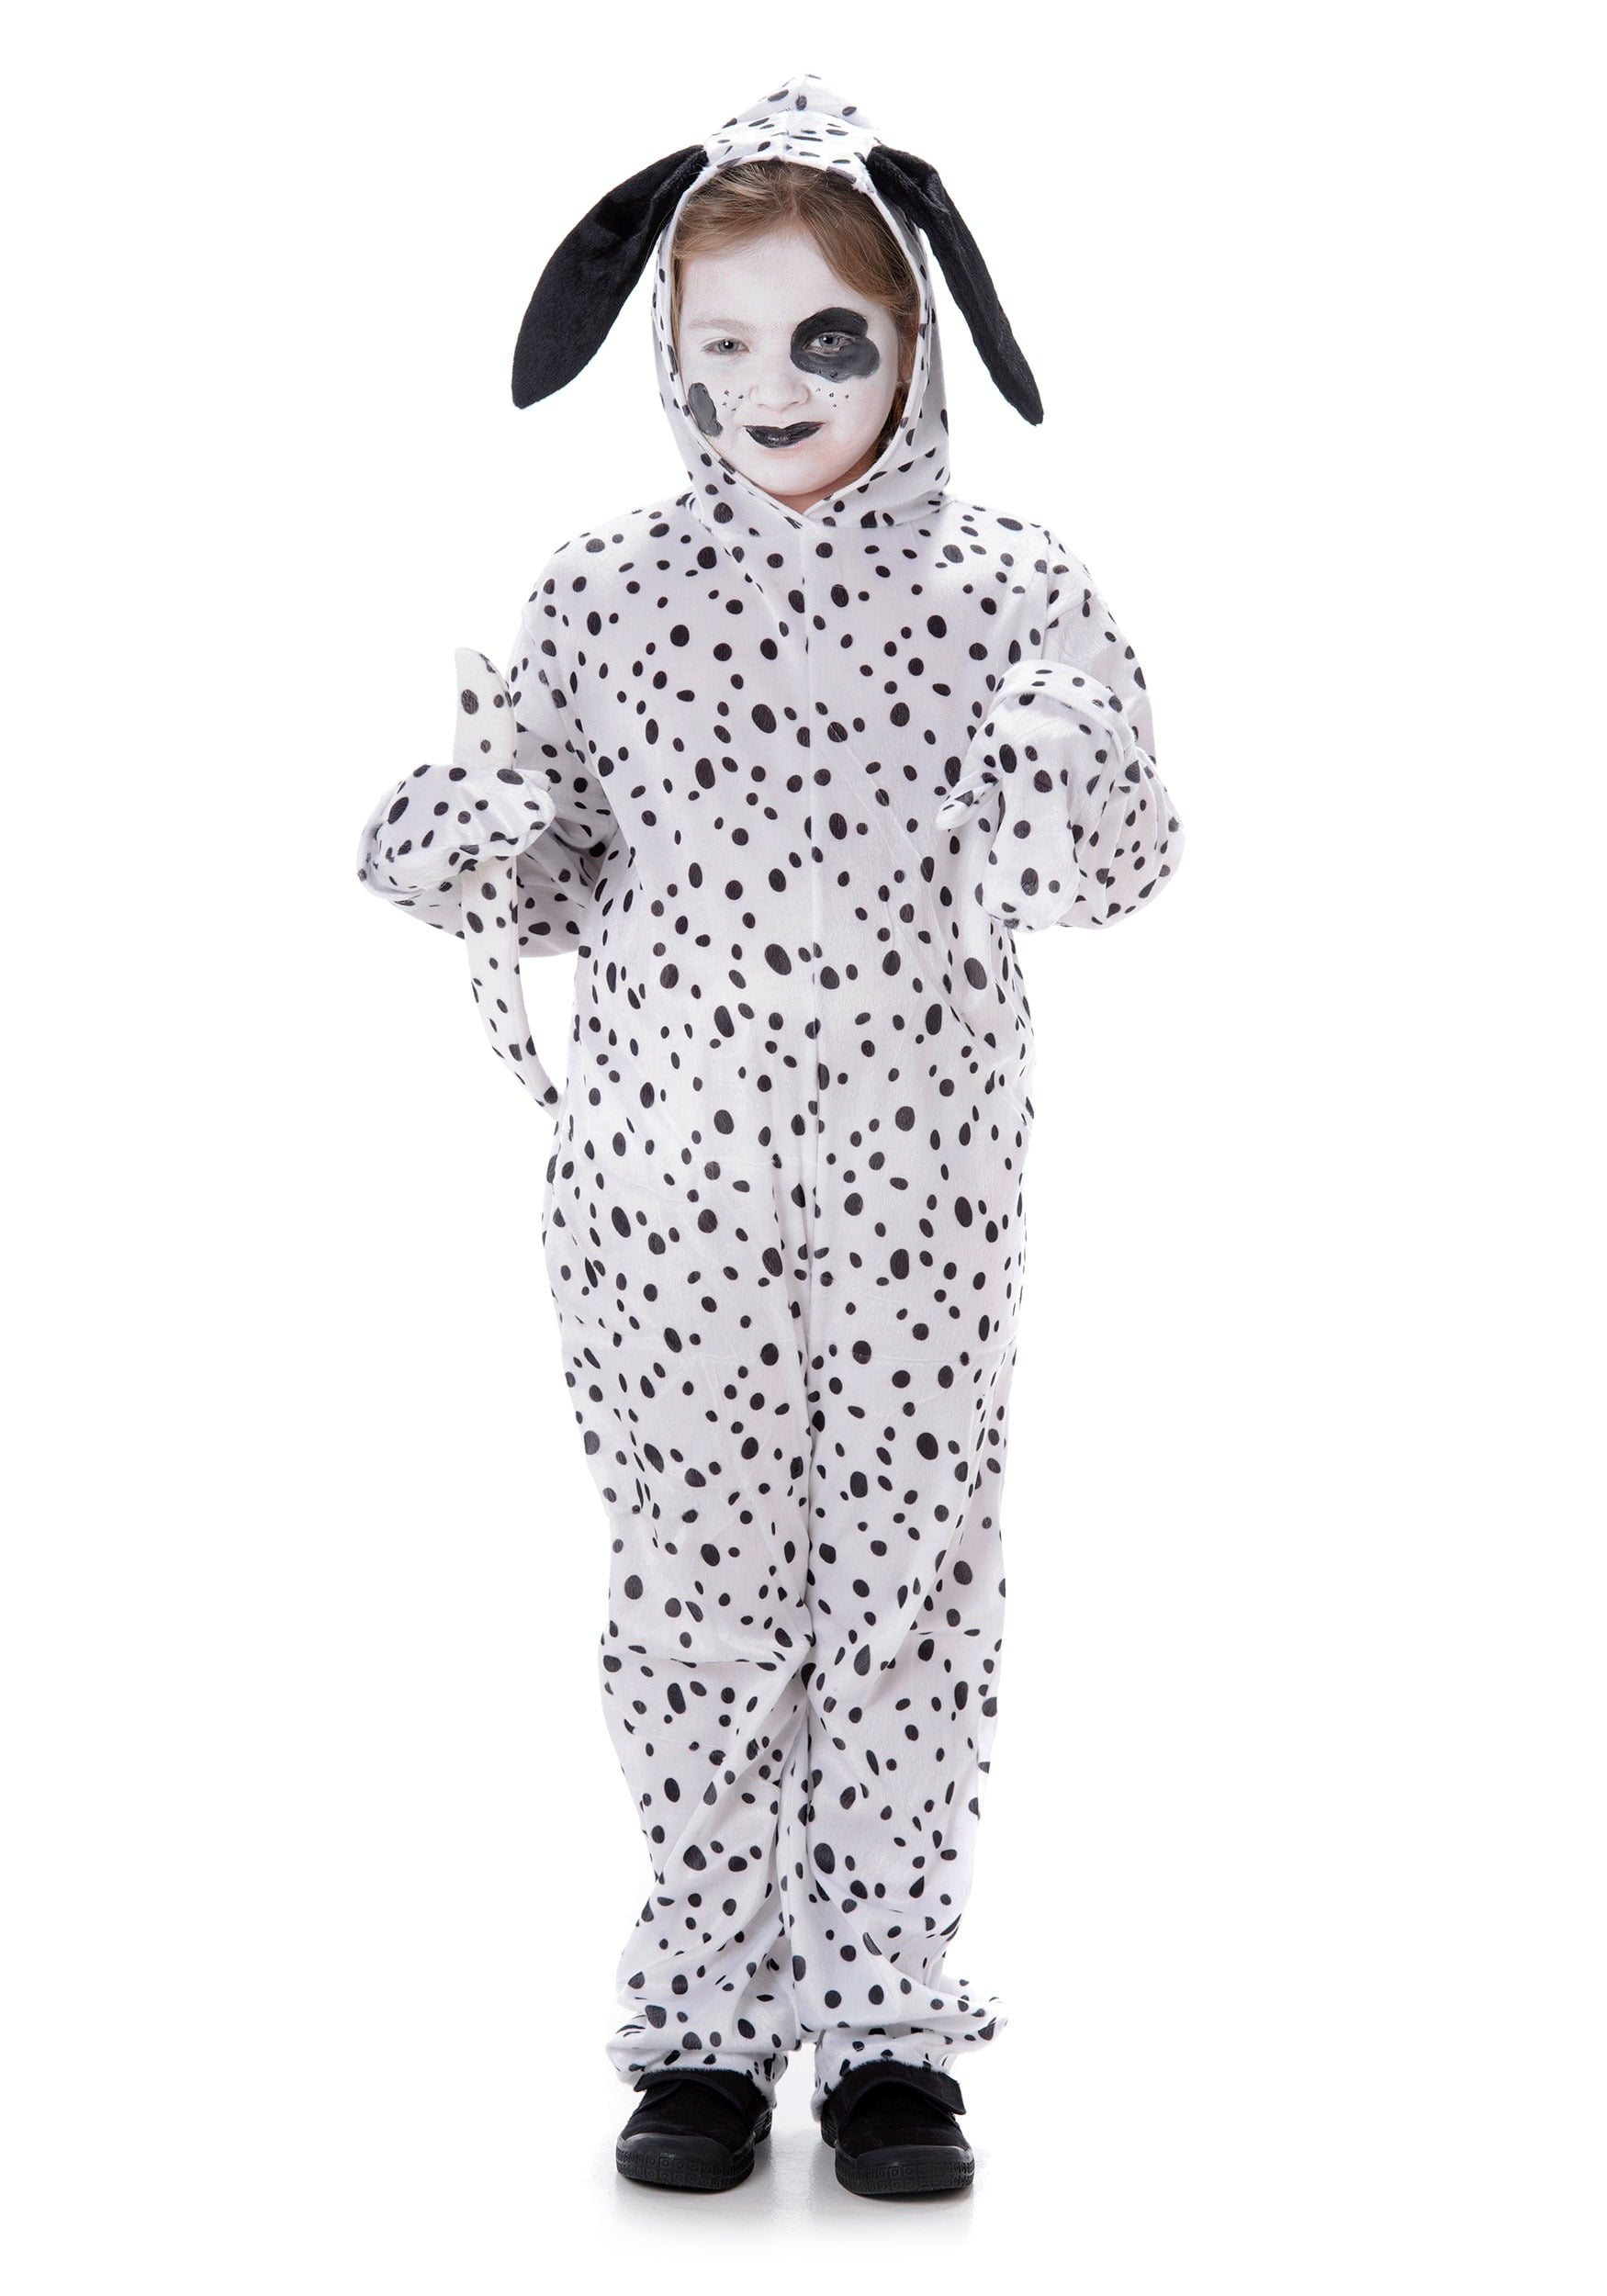 Kids Dalmatian Spotted Dog Hooded Jumpsuit & Tail Child Costume Spots SM-LG